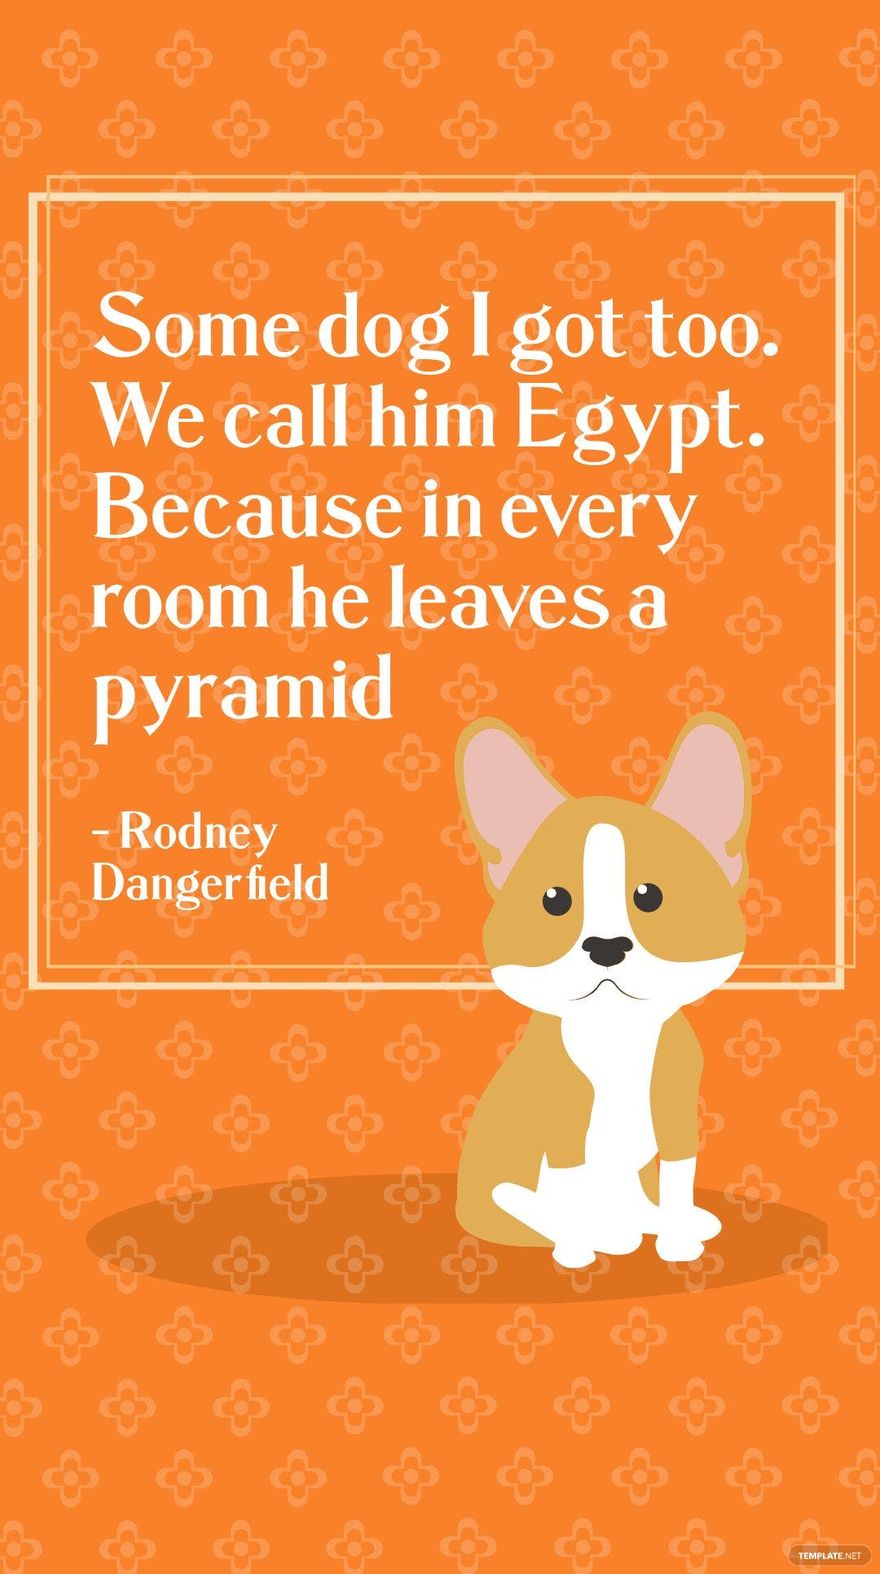 Rodney Dangerfield - Some dog I got too. We call him Egypt. Because in every room he leaves a pyramid in JPG